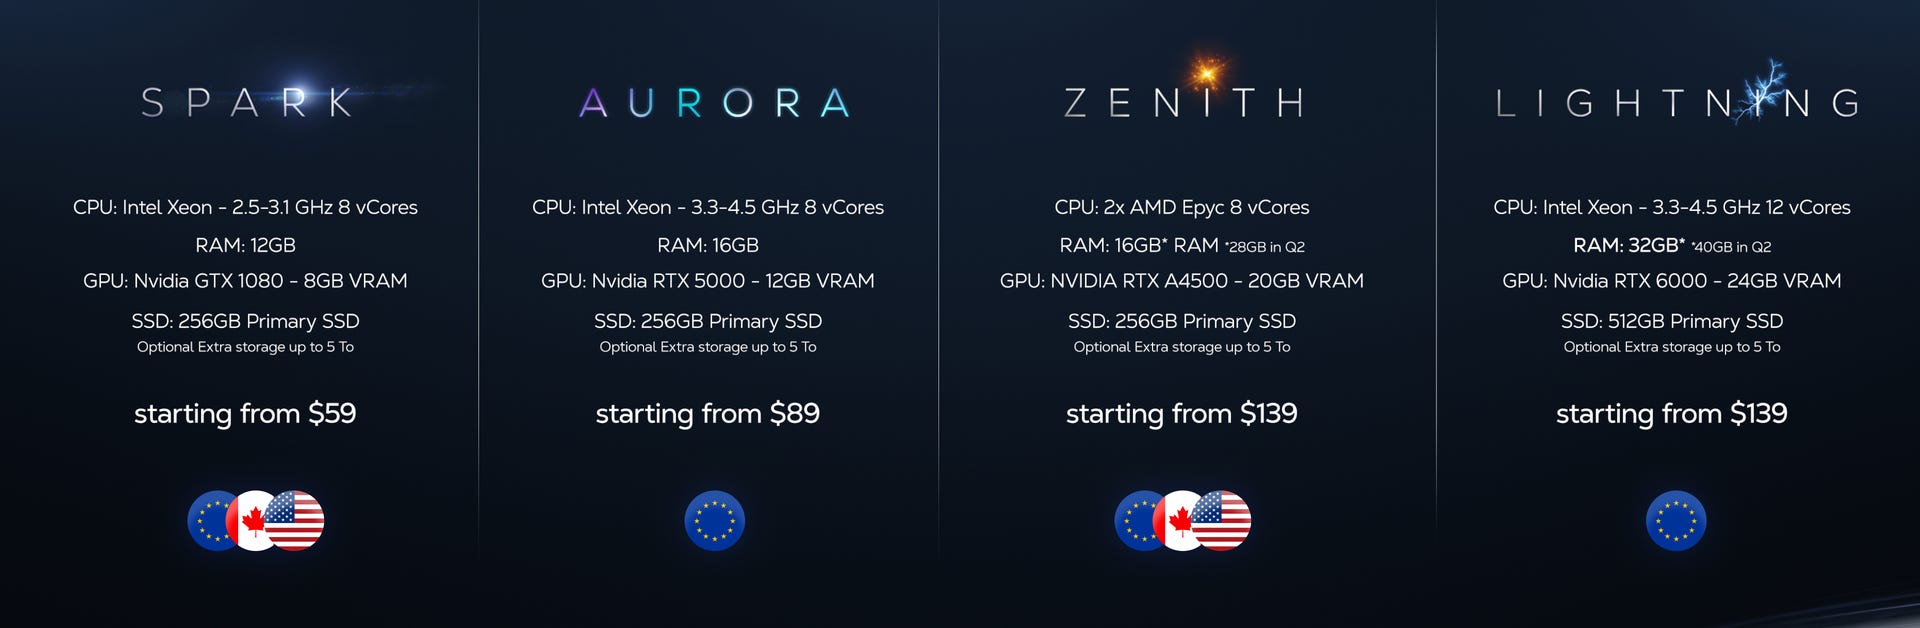 A screenshot showing the four Shadow for Makers plans, Spark, Aurora, Zenith and Lightning, with pricing and configurations.